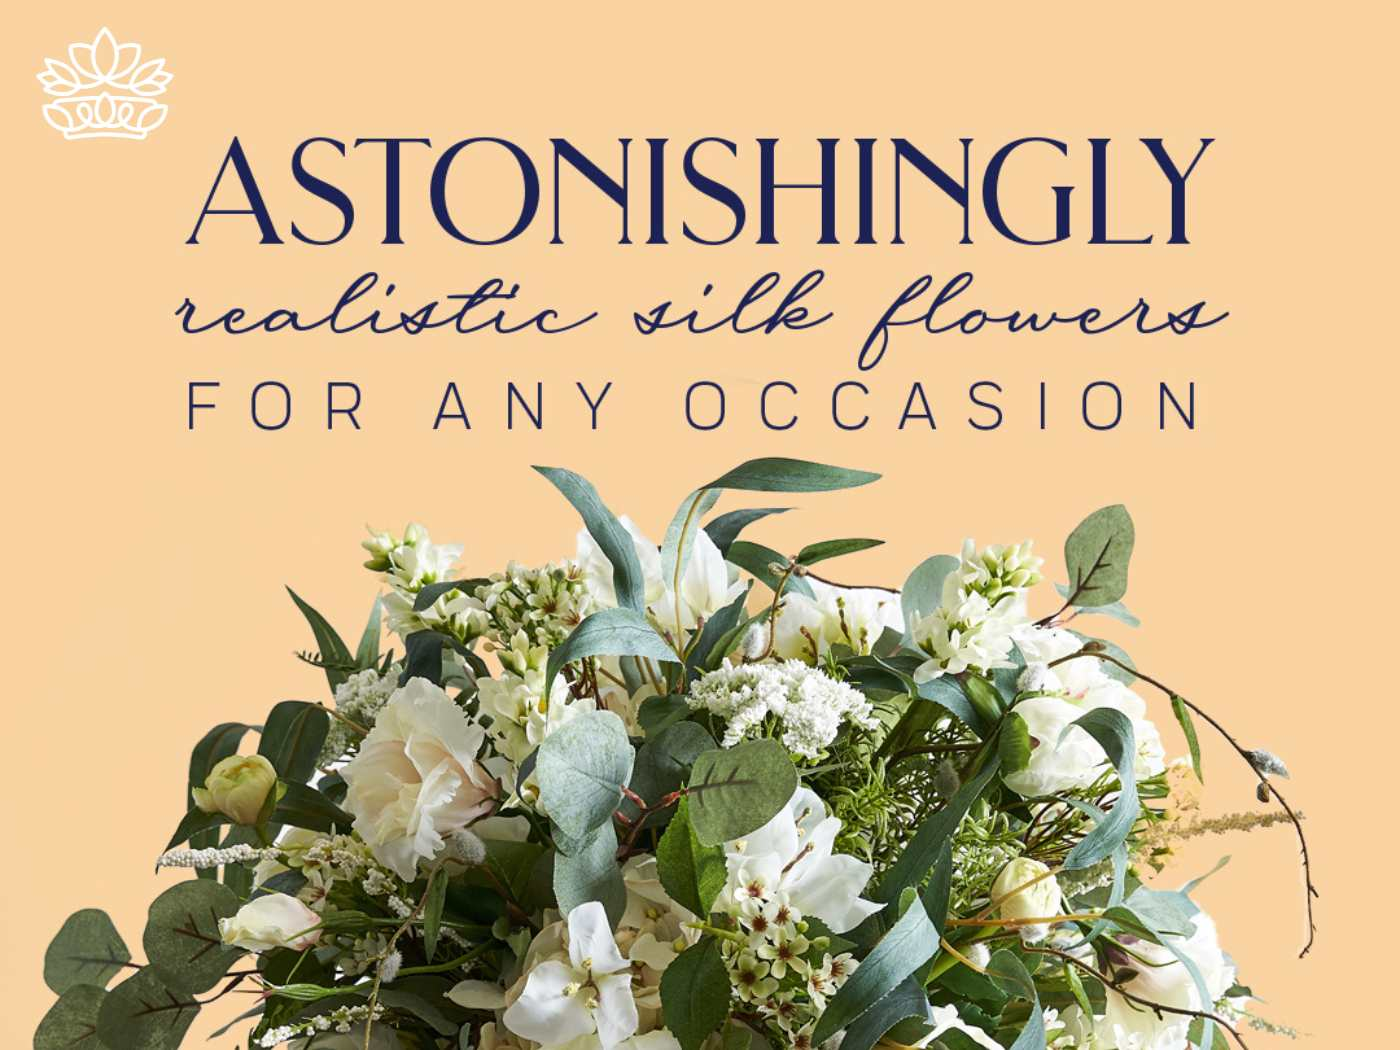 Display of ASTONISHINGLY realistic silk flowers, meticulously crafted to enhance any event, set against a soft peach background with a message of versatility for any occasion, offered by Fabulous Flowers and Gifts.